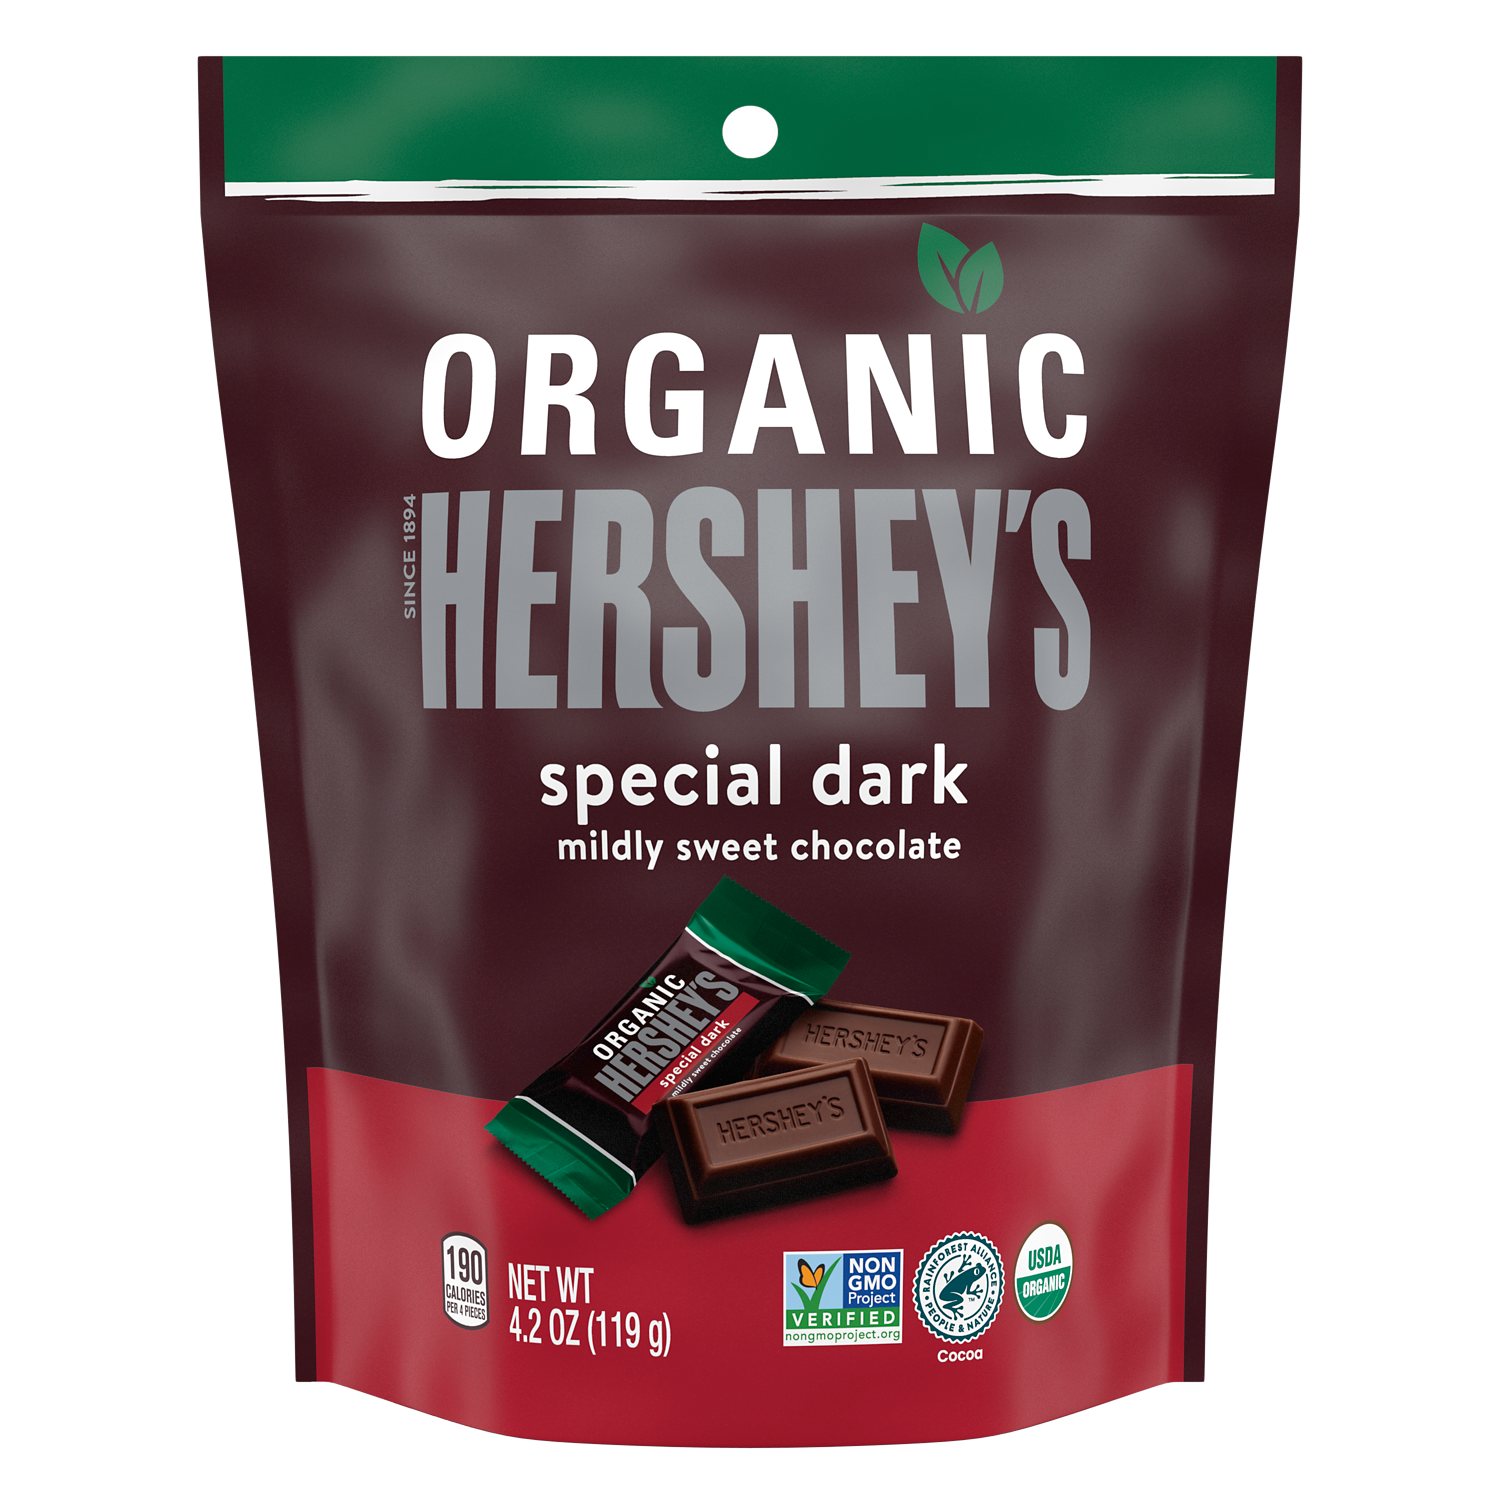 HERSHEY'S SPECIAL DARK Organic Miniatures Chocolate Candy Bars, 4.2 oz bag - Front of Package